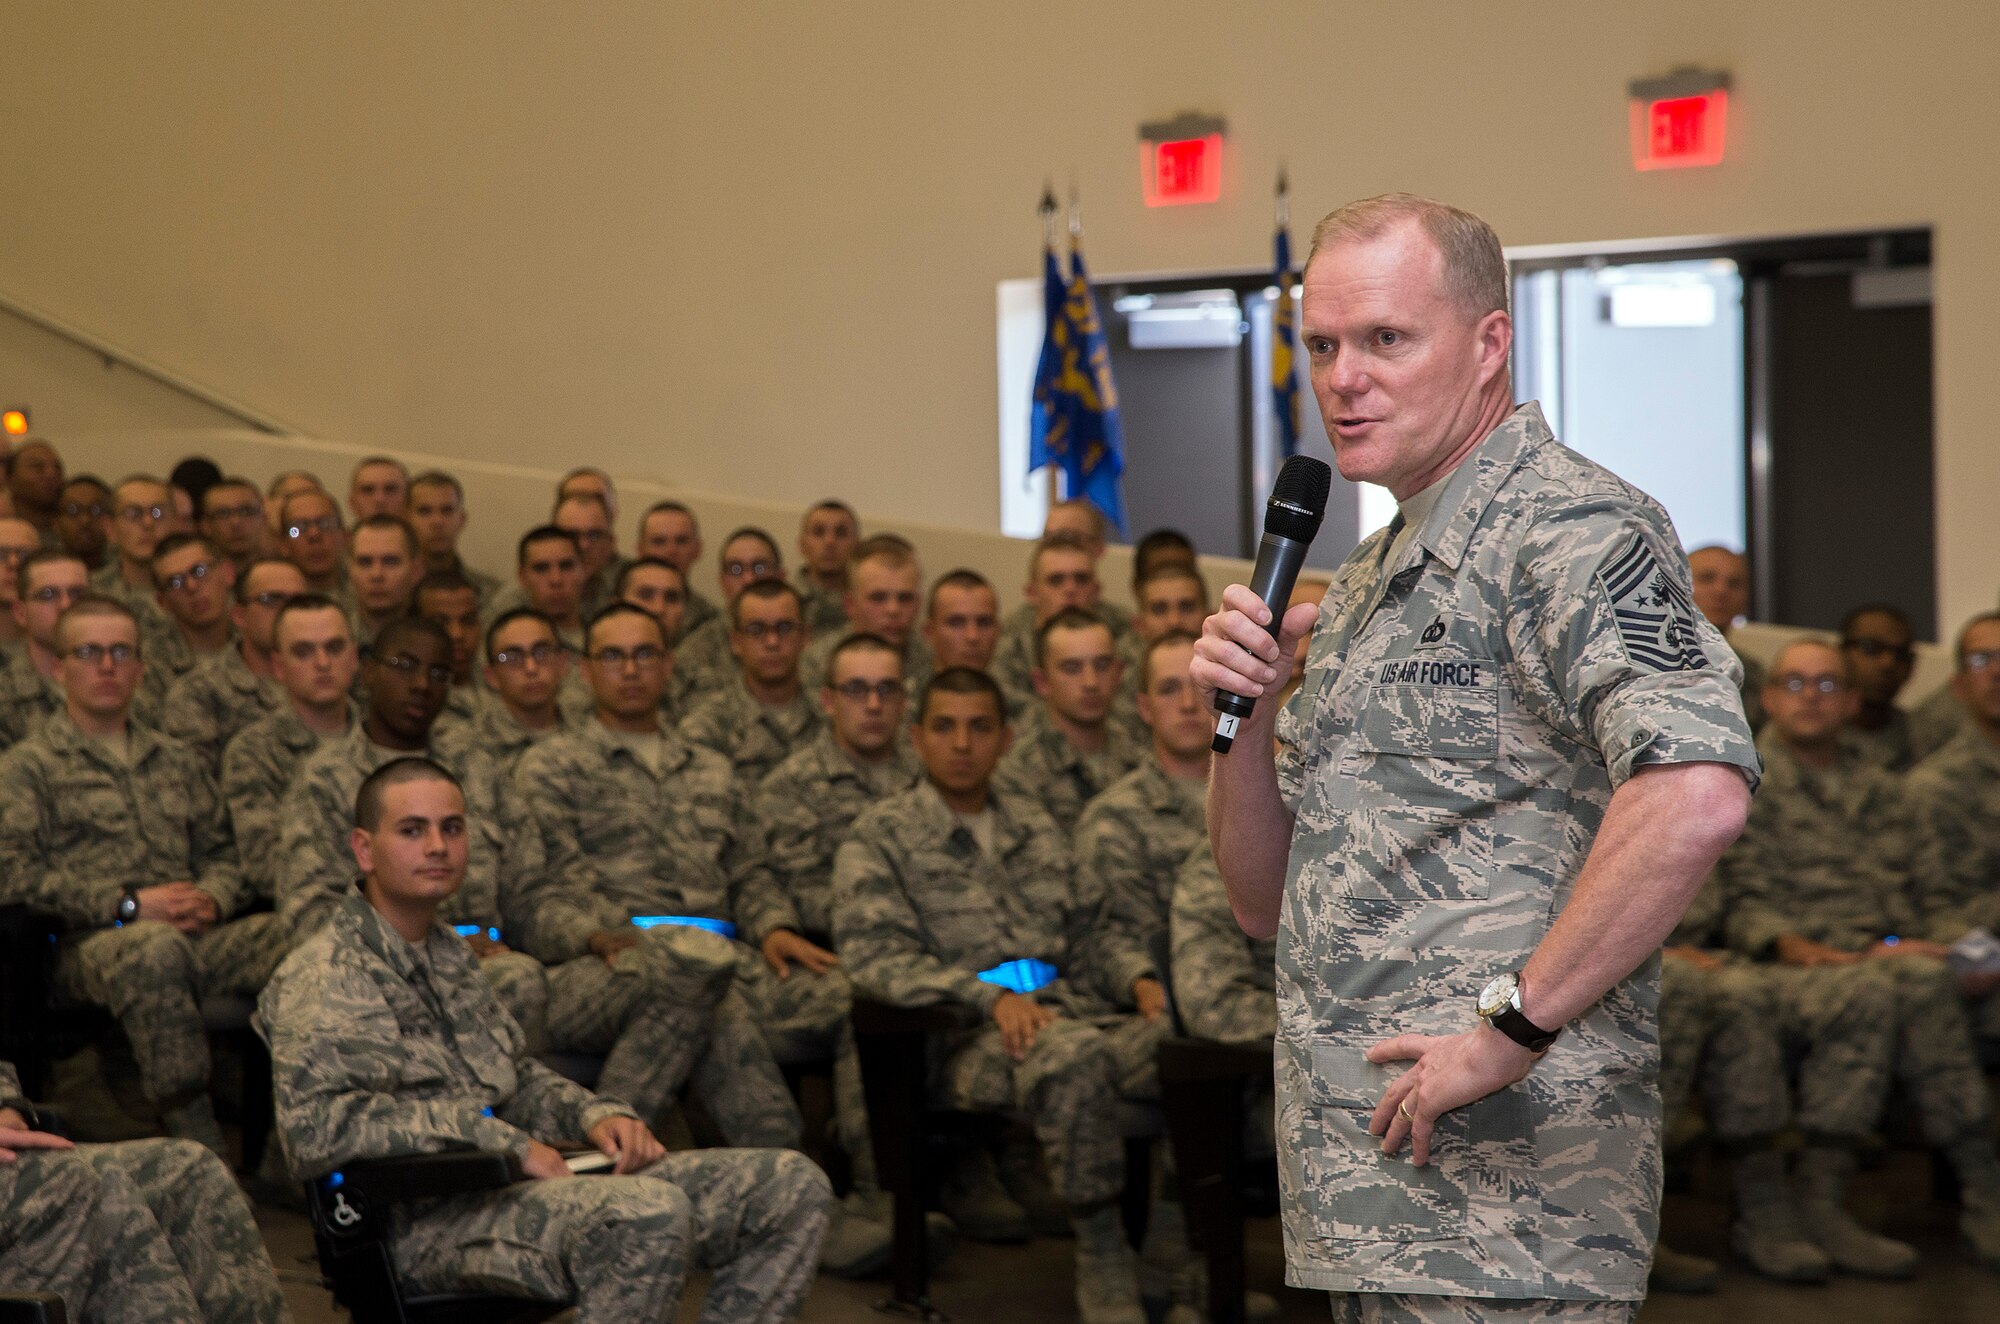 Chief Master Sgt. of the Air Force James A. Cody addresses the first Capstone Week class March 26, 2015, at Joint Base San Antonio-Lackland, Texas. Capstone is a five-day program that closes Air Force Basic Military Training. During Capstone, the Air Force's newest Airmen learn about the importance of wingmanship, resiliency, leadership and followership, sexual assault prevention and response, the warrior ethos, and how Airmen can balance their personal and professional lives. Capstone Week’s purpose is to further develop professional, resilient Airmen who are inspired by heritage, committed to its core values, and motivated to deliver airpower. While BMT will still provide new Airmen the same high level of military and physical training, Capstone Week serves to specifically concentrate on character building. (U.S. Air Force photo by Johnny Saldivar)